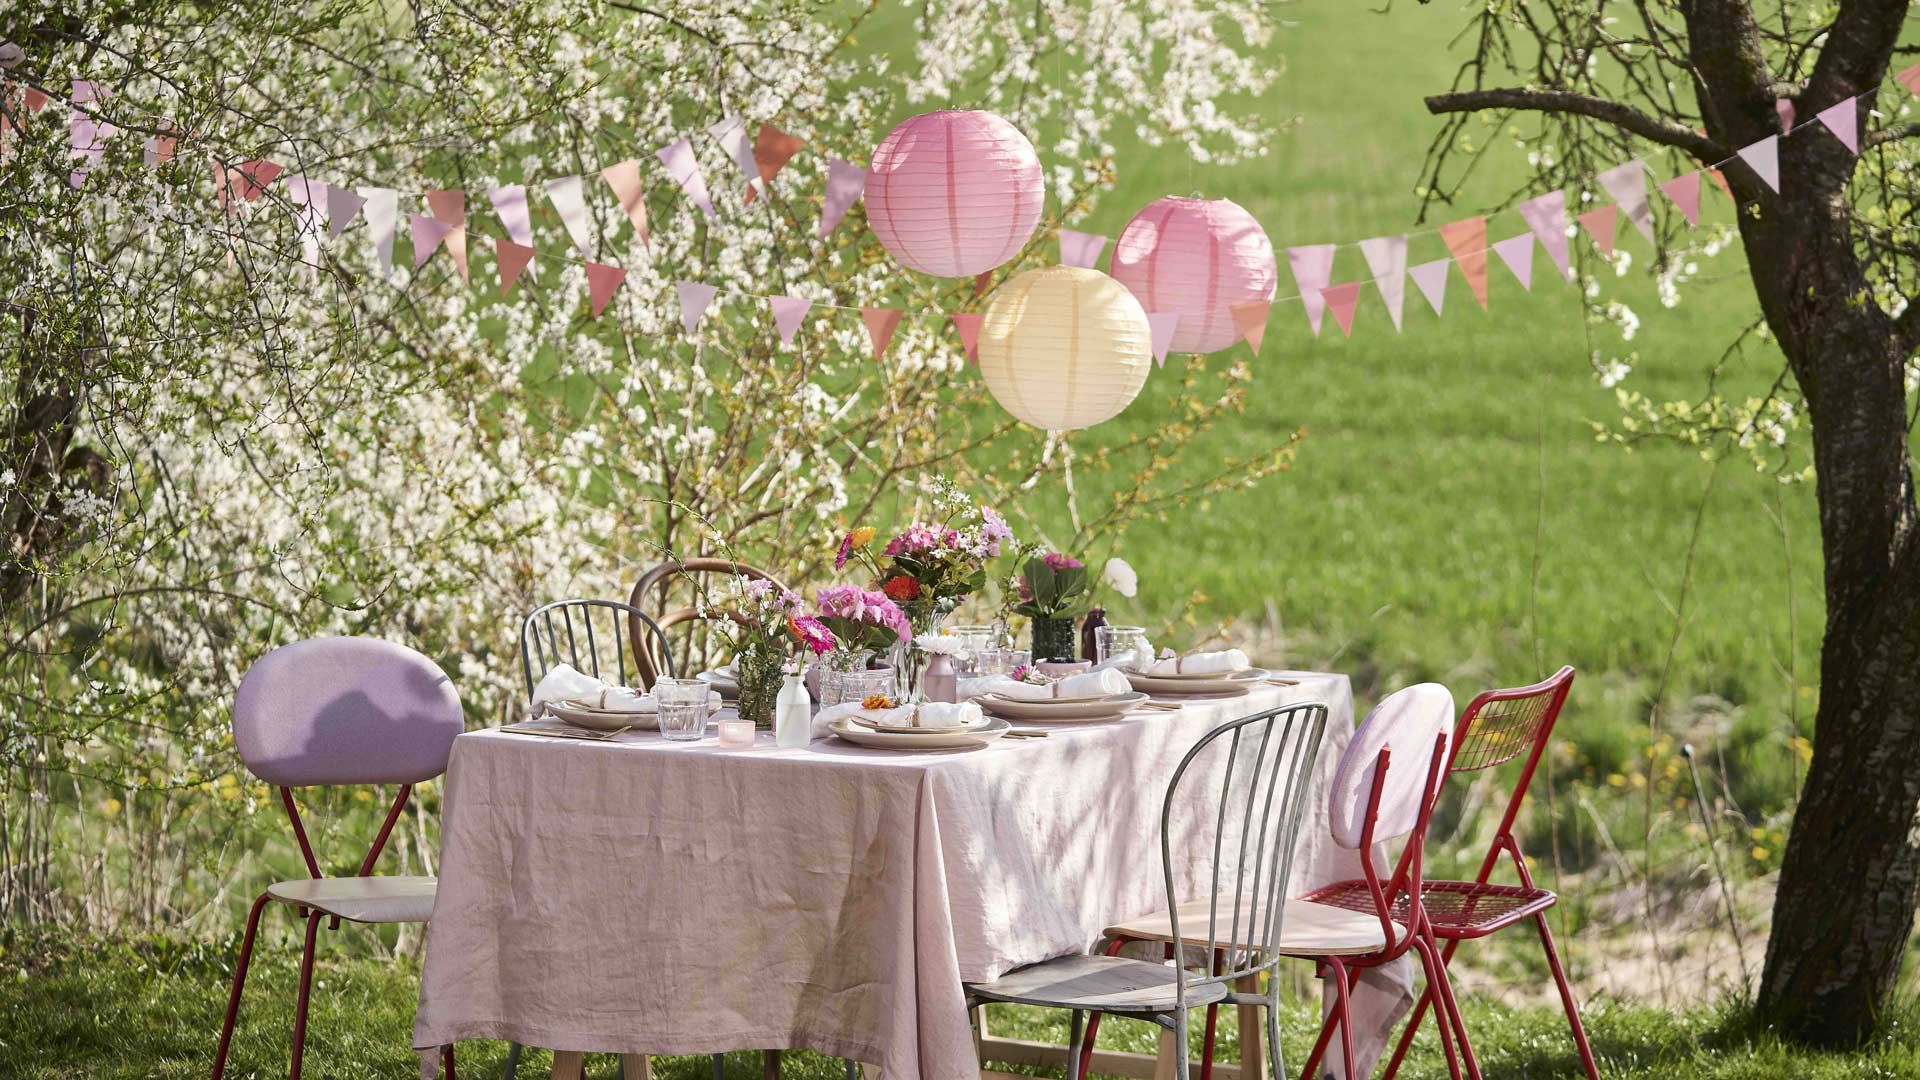 <p>                     <strong>Whether throwing a family gathering, graduation party, birthday celebration, or a simple summer soiree, the right garden party ideas can elevate outdoor spaces and backyards into an impressive party setting.</strong>                   </p>                                      <p>                     From outdoor lighting and garden bar pop-ups to fabulous garden decoration ideas and tropical garden party themes, with a few easy steps, you can welcome guests into a beautifully styled space made for entertaining.                    </p>                                      <p>                     If you're entertaining regularly, or want to invest in your outdoor space, think about drawing on some of the hottest garden trends and include some of the more permanent outdoor living room ideas in your backyard, like ambient lighting or a stylish fire pit. For one-off parties, sophisticated table styling and subtle decorations can really help to transform your space in a flash. Whatever the occasion, see our inspiring garden party ideas to inspire how you style your next social gathering.                    </p>                                      <p>                     <em>BY TAMARA KELLY. CONTRIBUTIONS FROM AMY HUNT</em>                   </p>